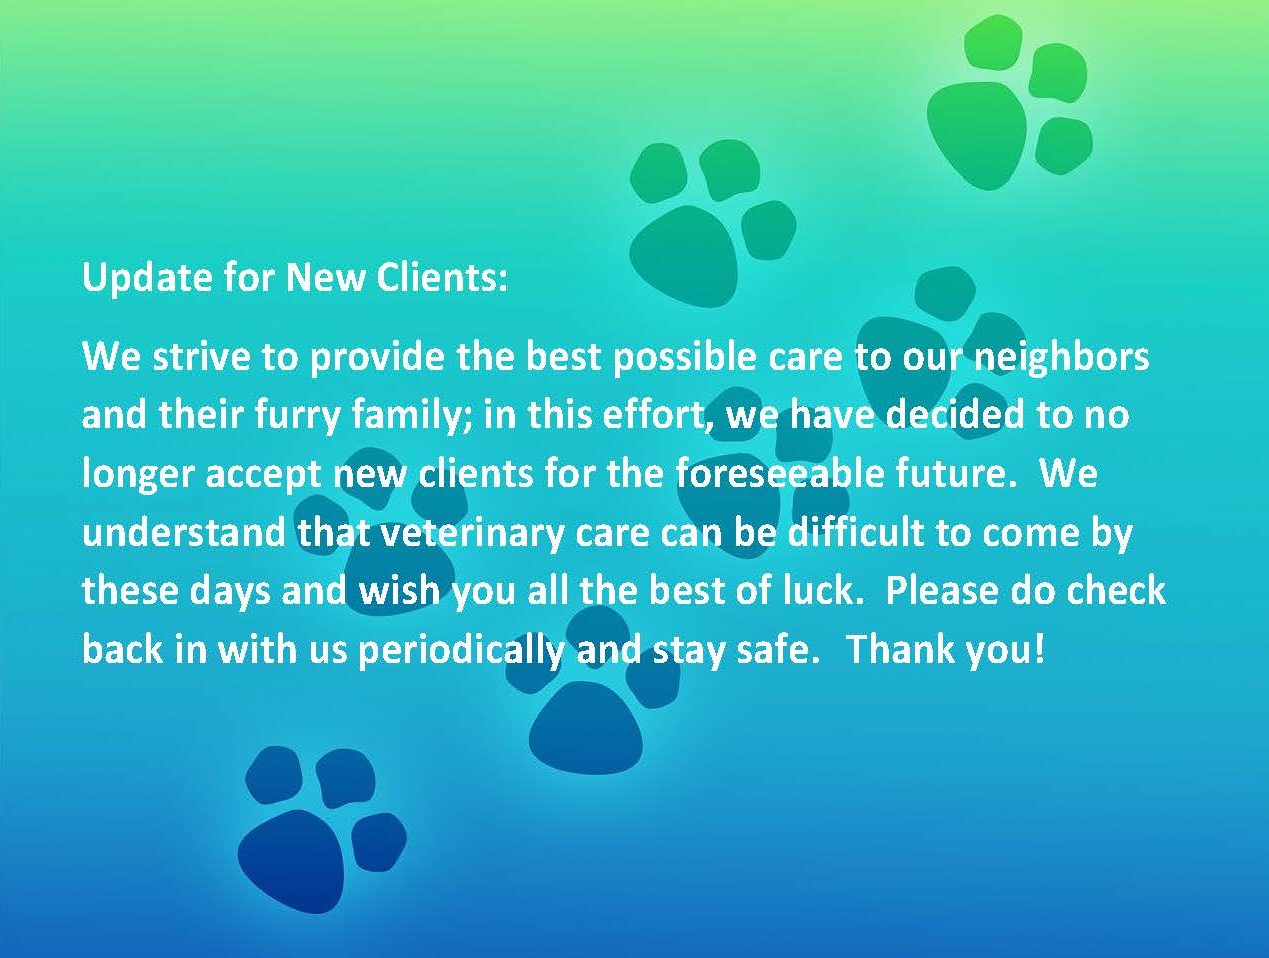 Update for New Clients